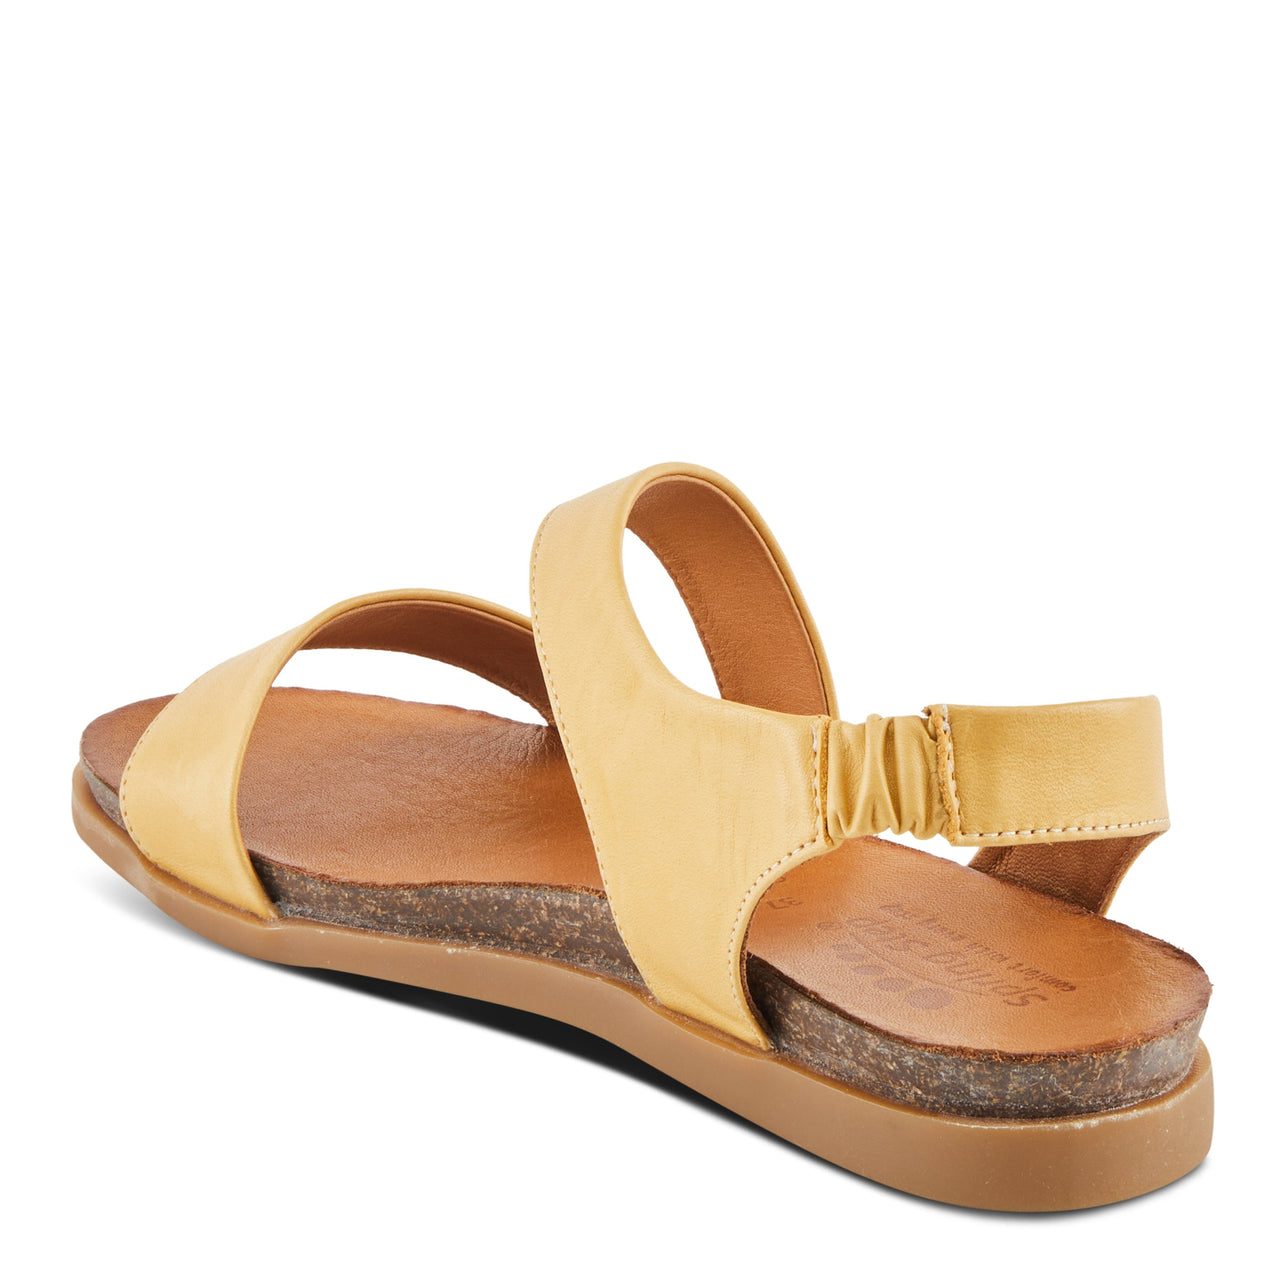 Stylish and comfortable Spring Step Besitos Sandals in a beautiful neutral color with intricate woven design and adjustable ankle strap